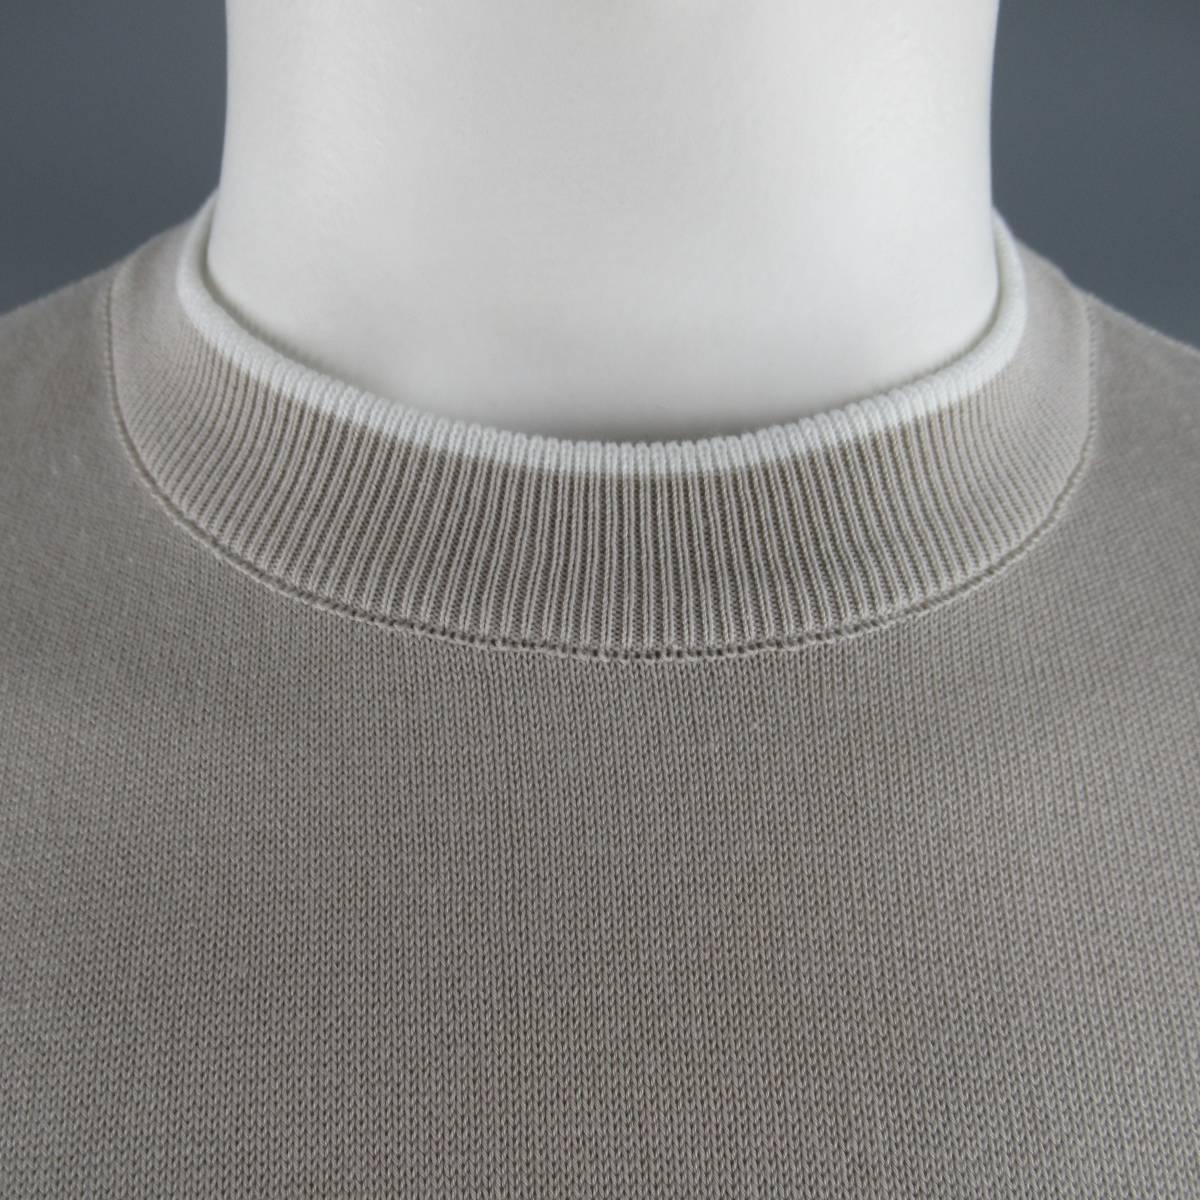 Classic BRIONI T-shirt comes in a beige cotton pique knit  with white accent striped collar and sleeves. Made in Italy.
 
New with Tags.
Marked: L
 
Measurements:
 
Shoulder: 19.5 in.
Chest: 46 in.
Sleeve: 10.5 in.
Length: 29 in.

SKU: 84042